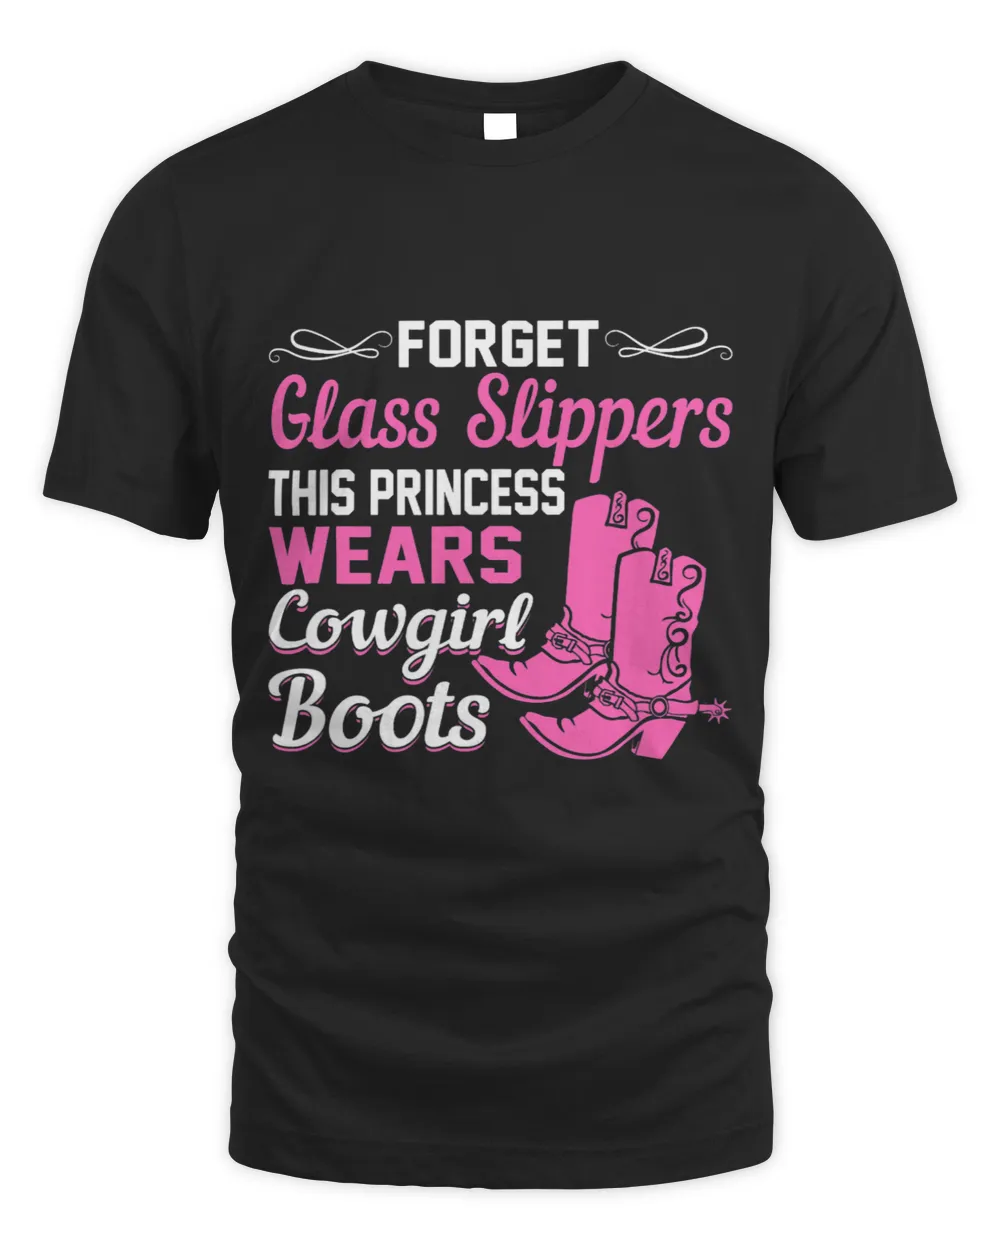 Forget Glass Slippers This Princess Wears Cowgirl Boots